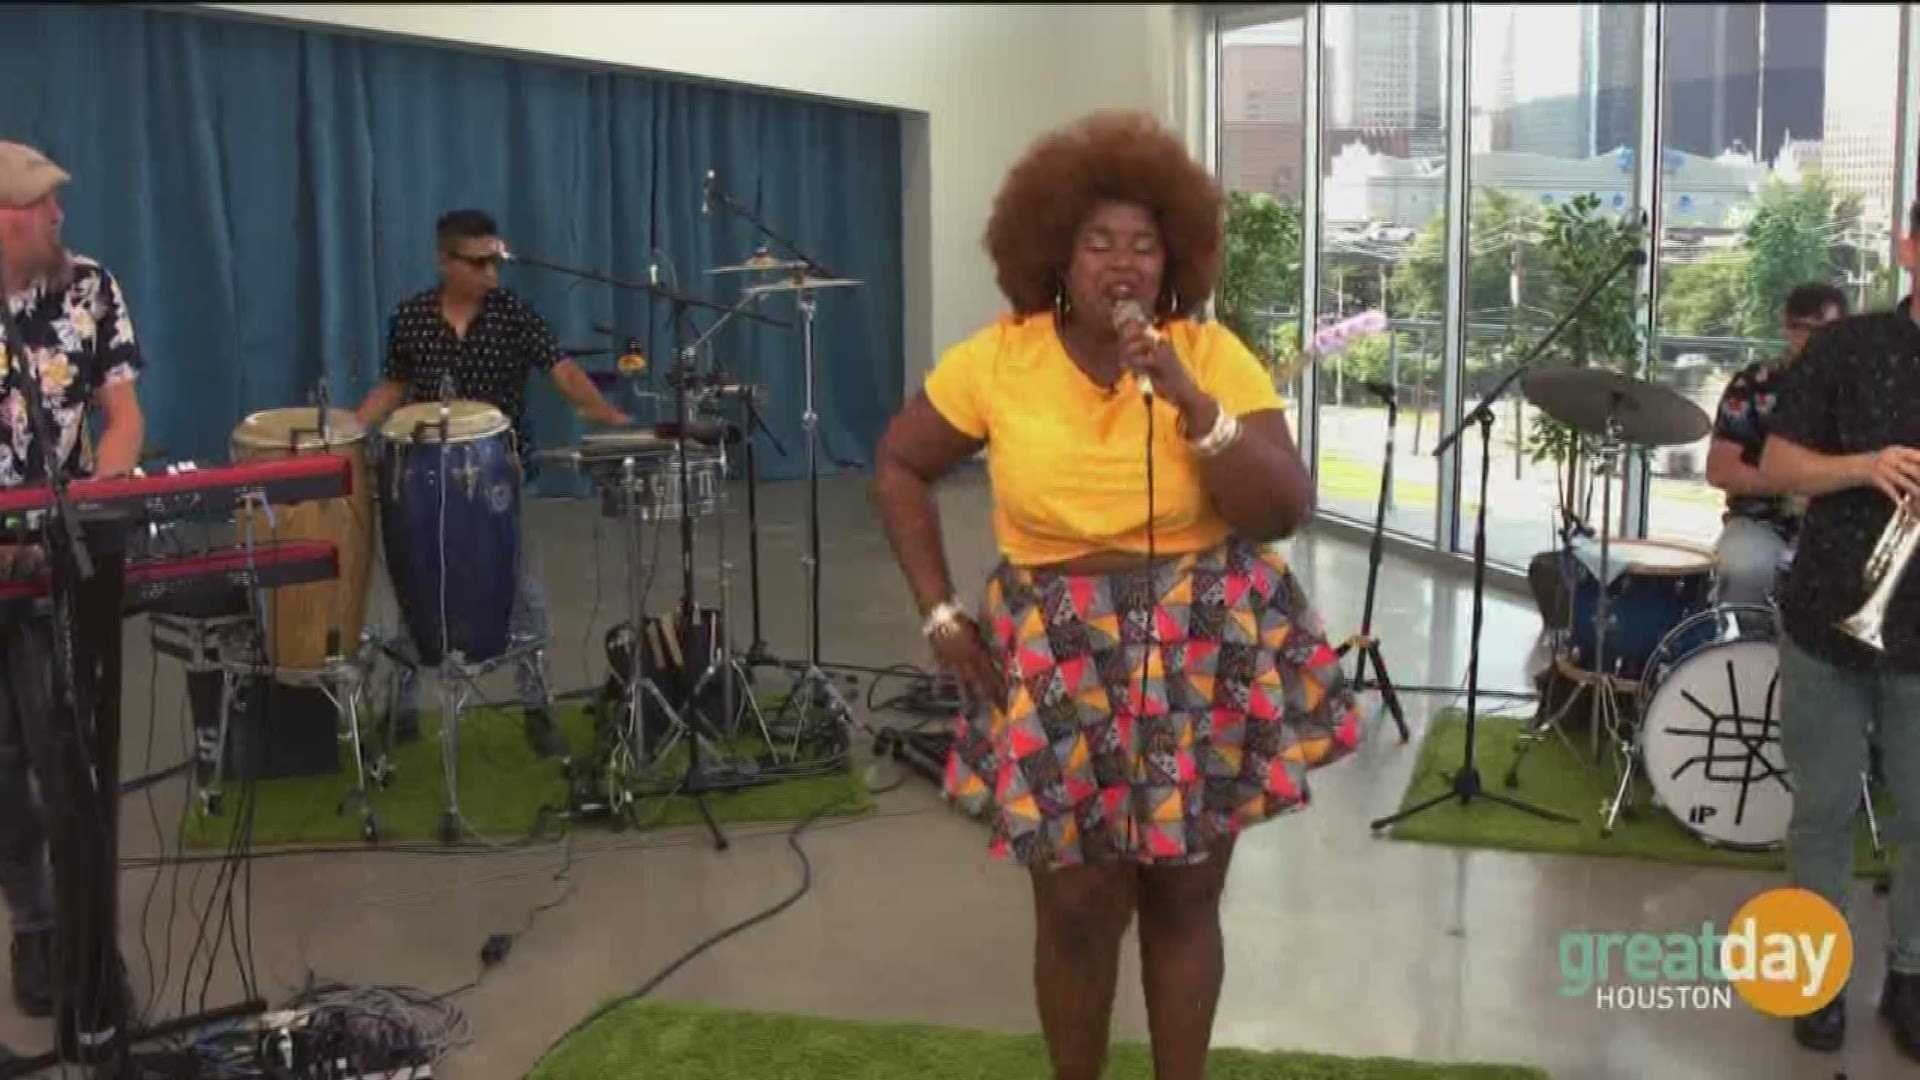 Houston's hottest band, The Suffers, gave us a taste of music from their new album Everything Here.